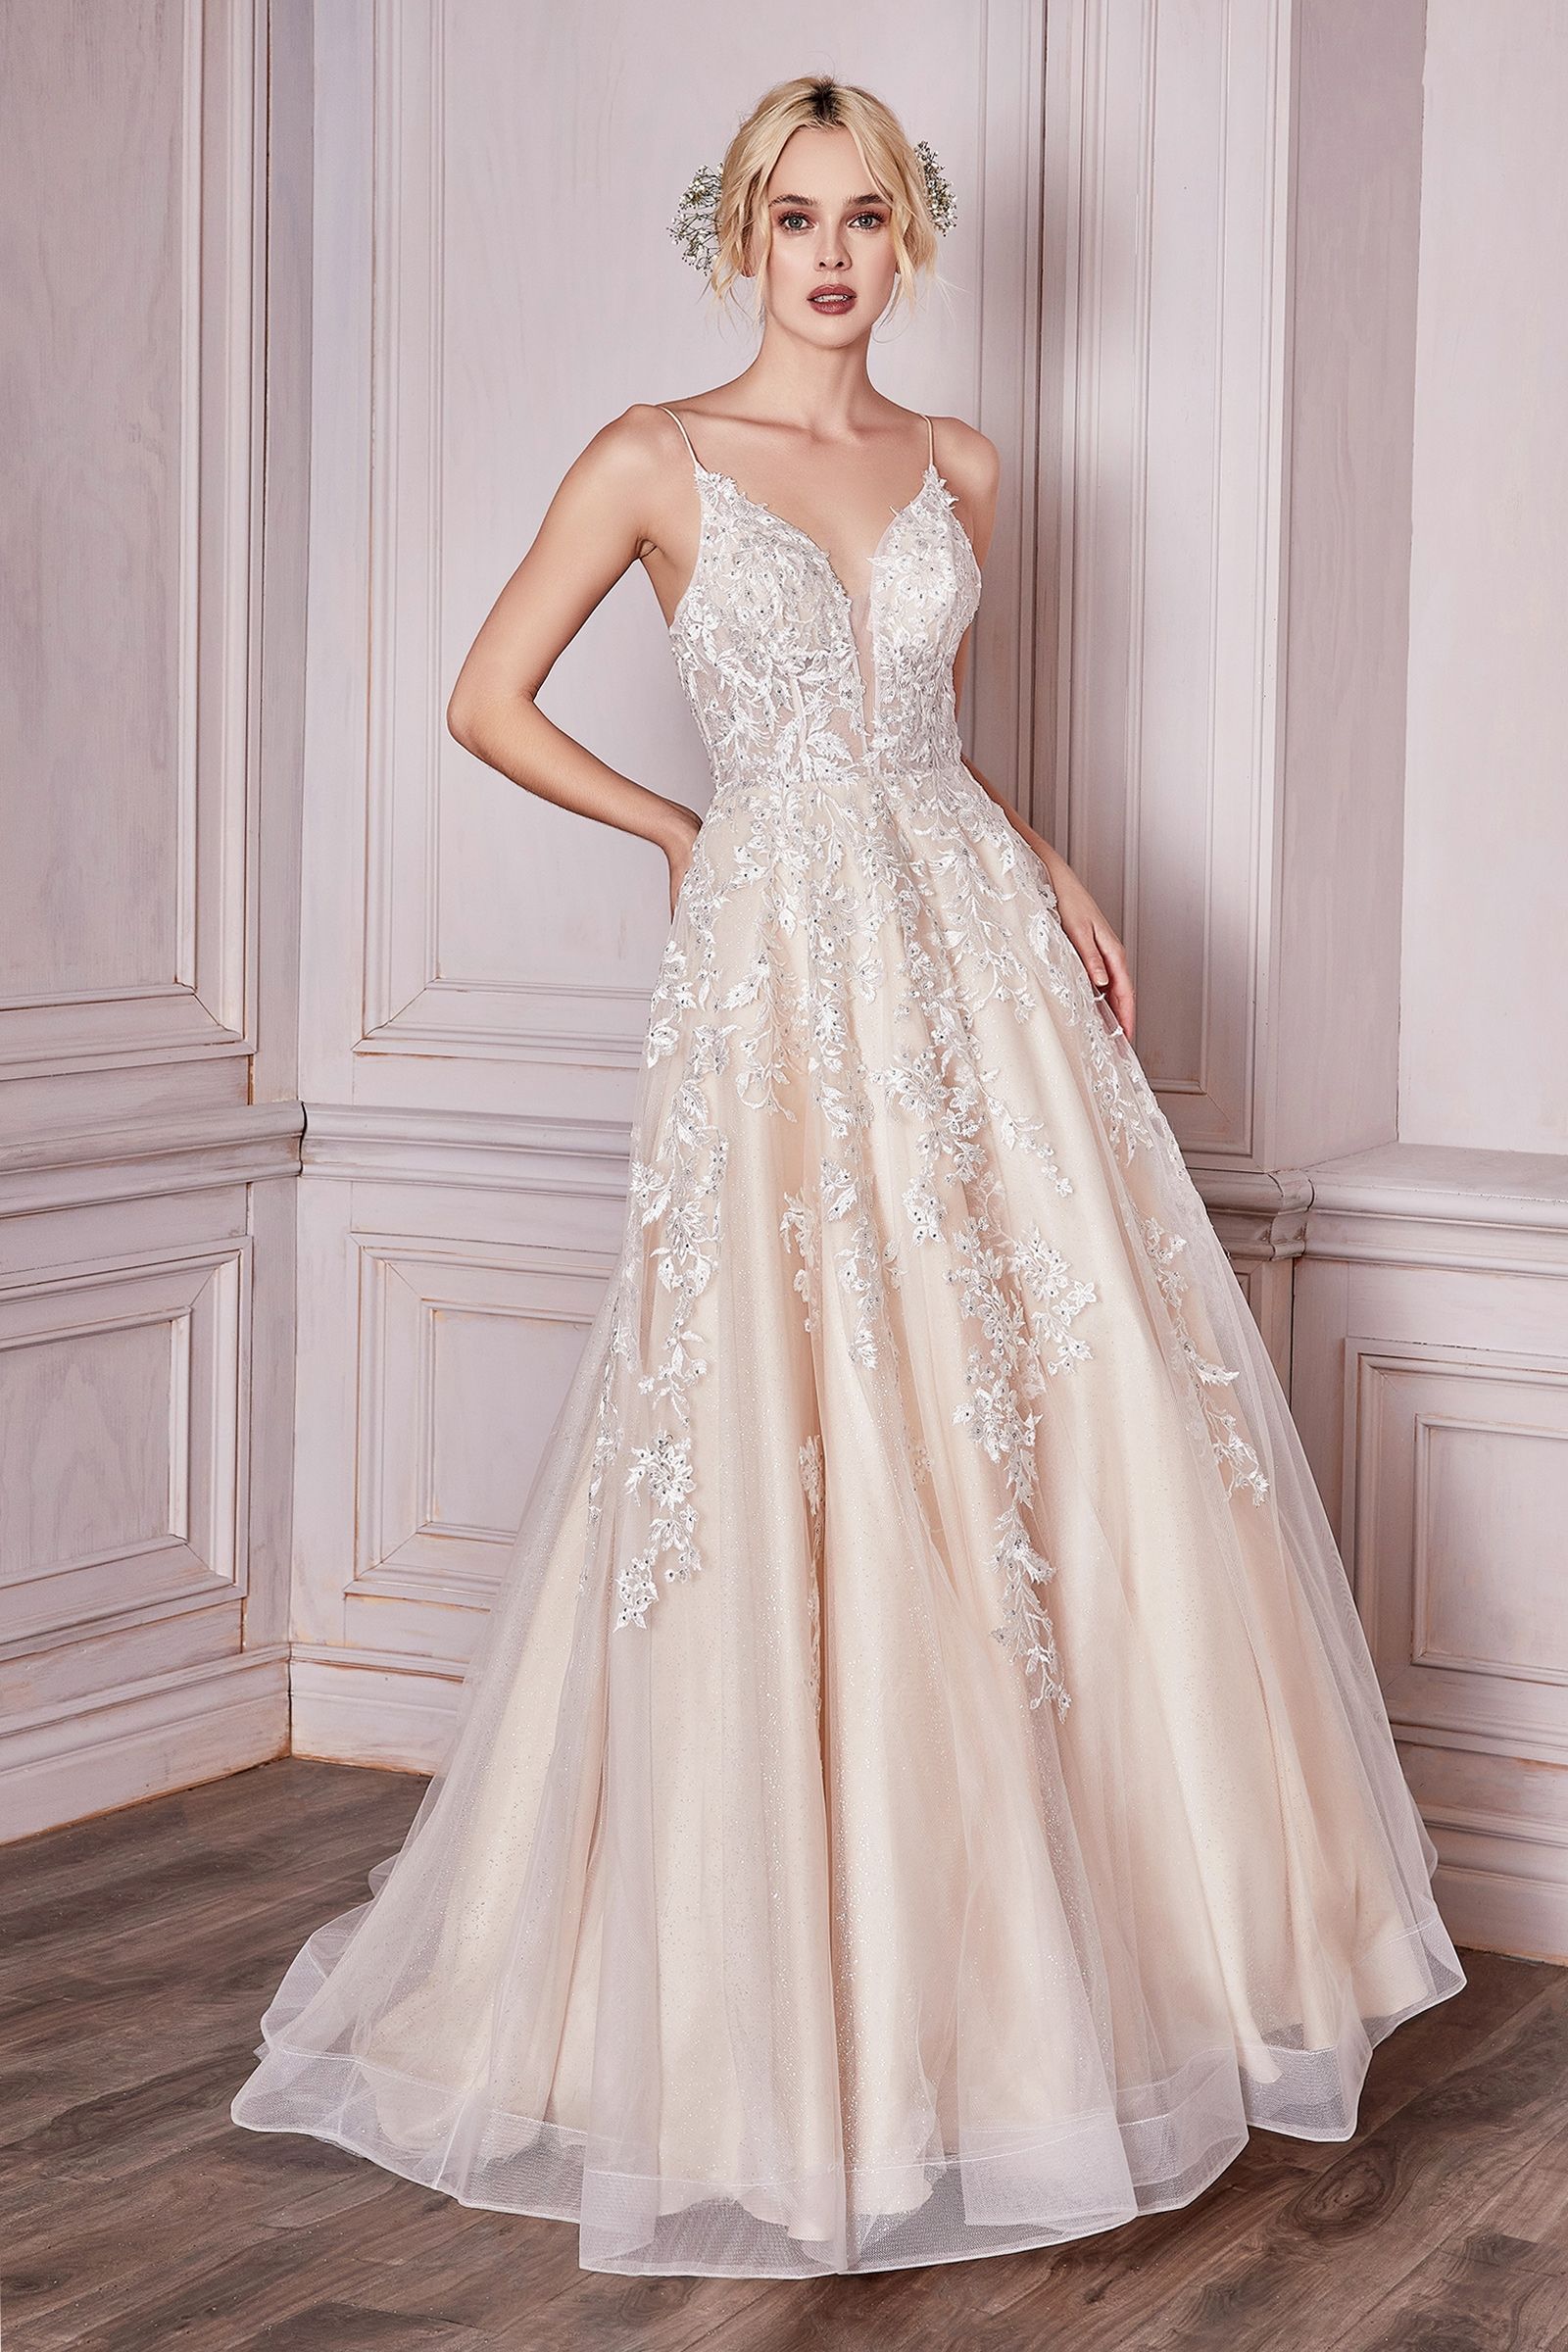 Bridal Ball Gown in Champagne-smcdress